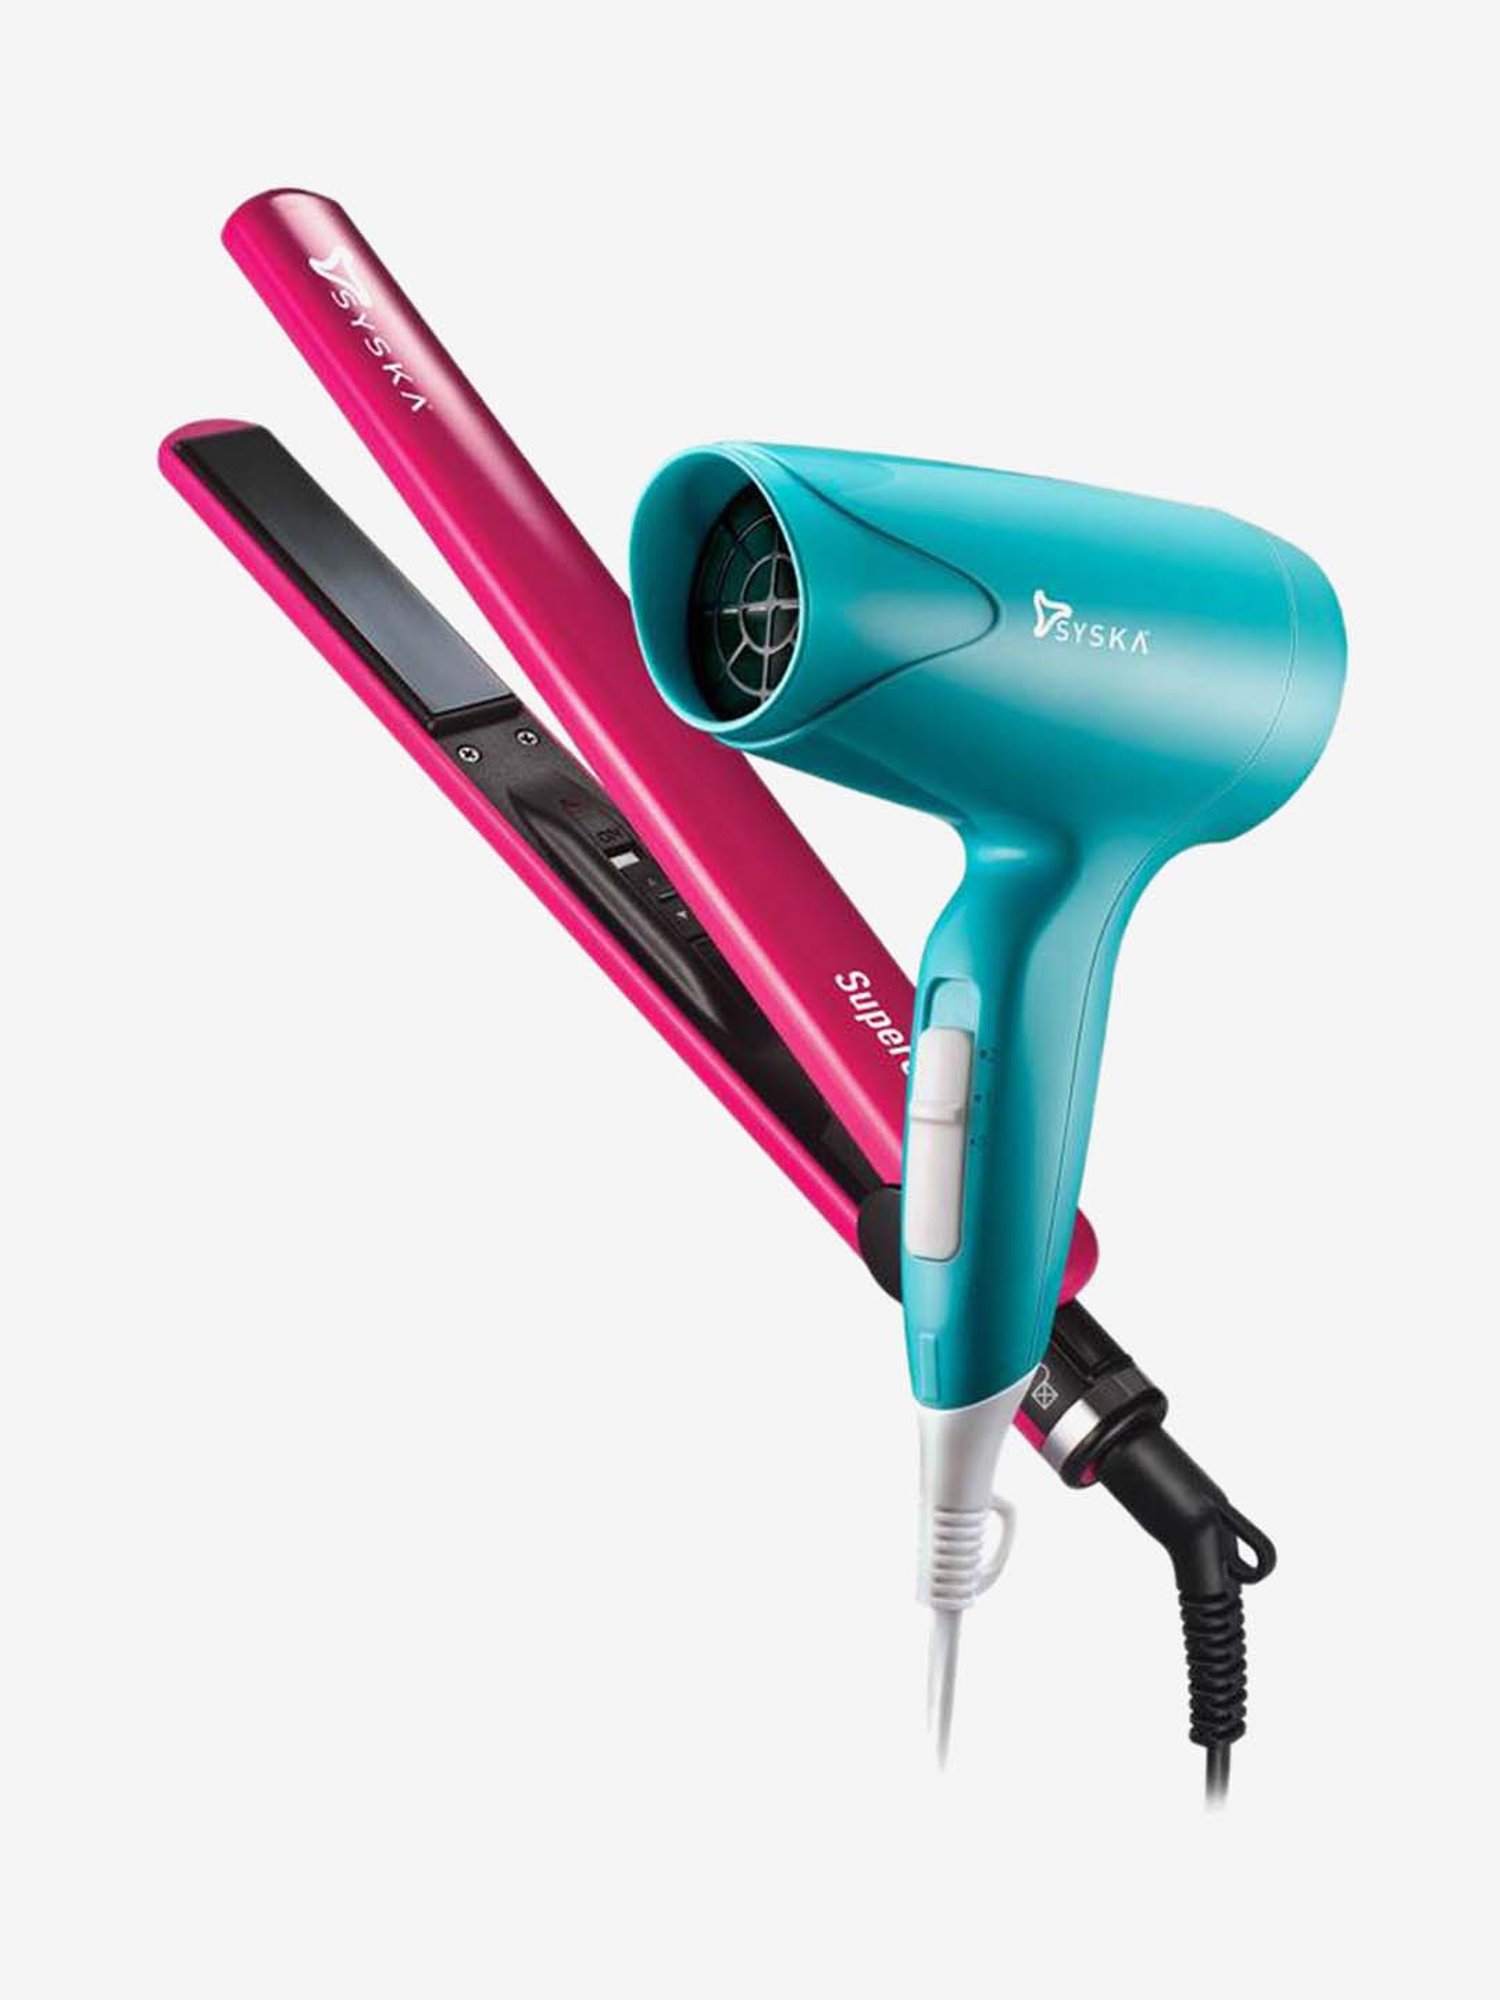 Sokany HS3890 New Fashion Hair Dryer  2300W Strong Brush  Best Price  Online  Jumia Egypt